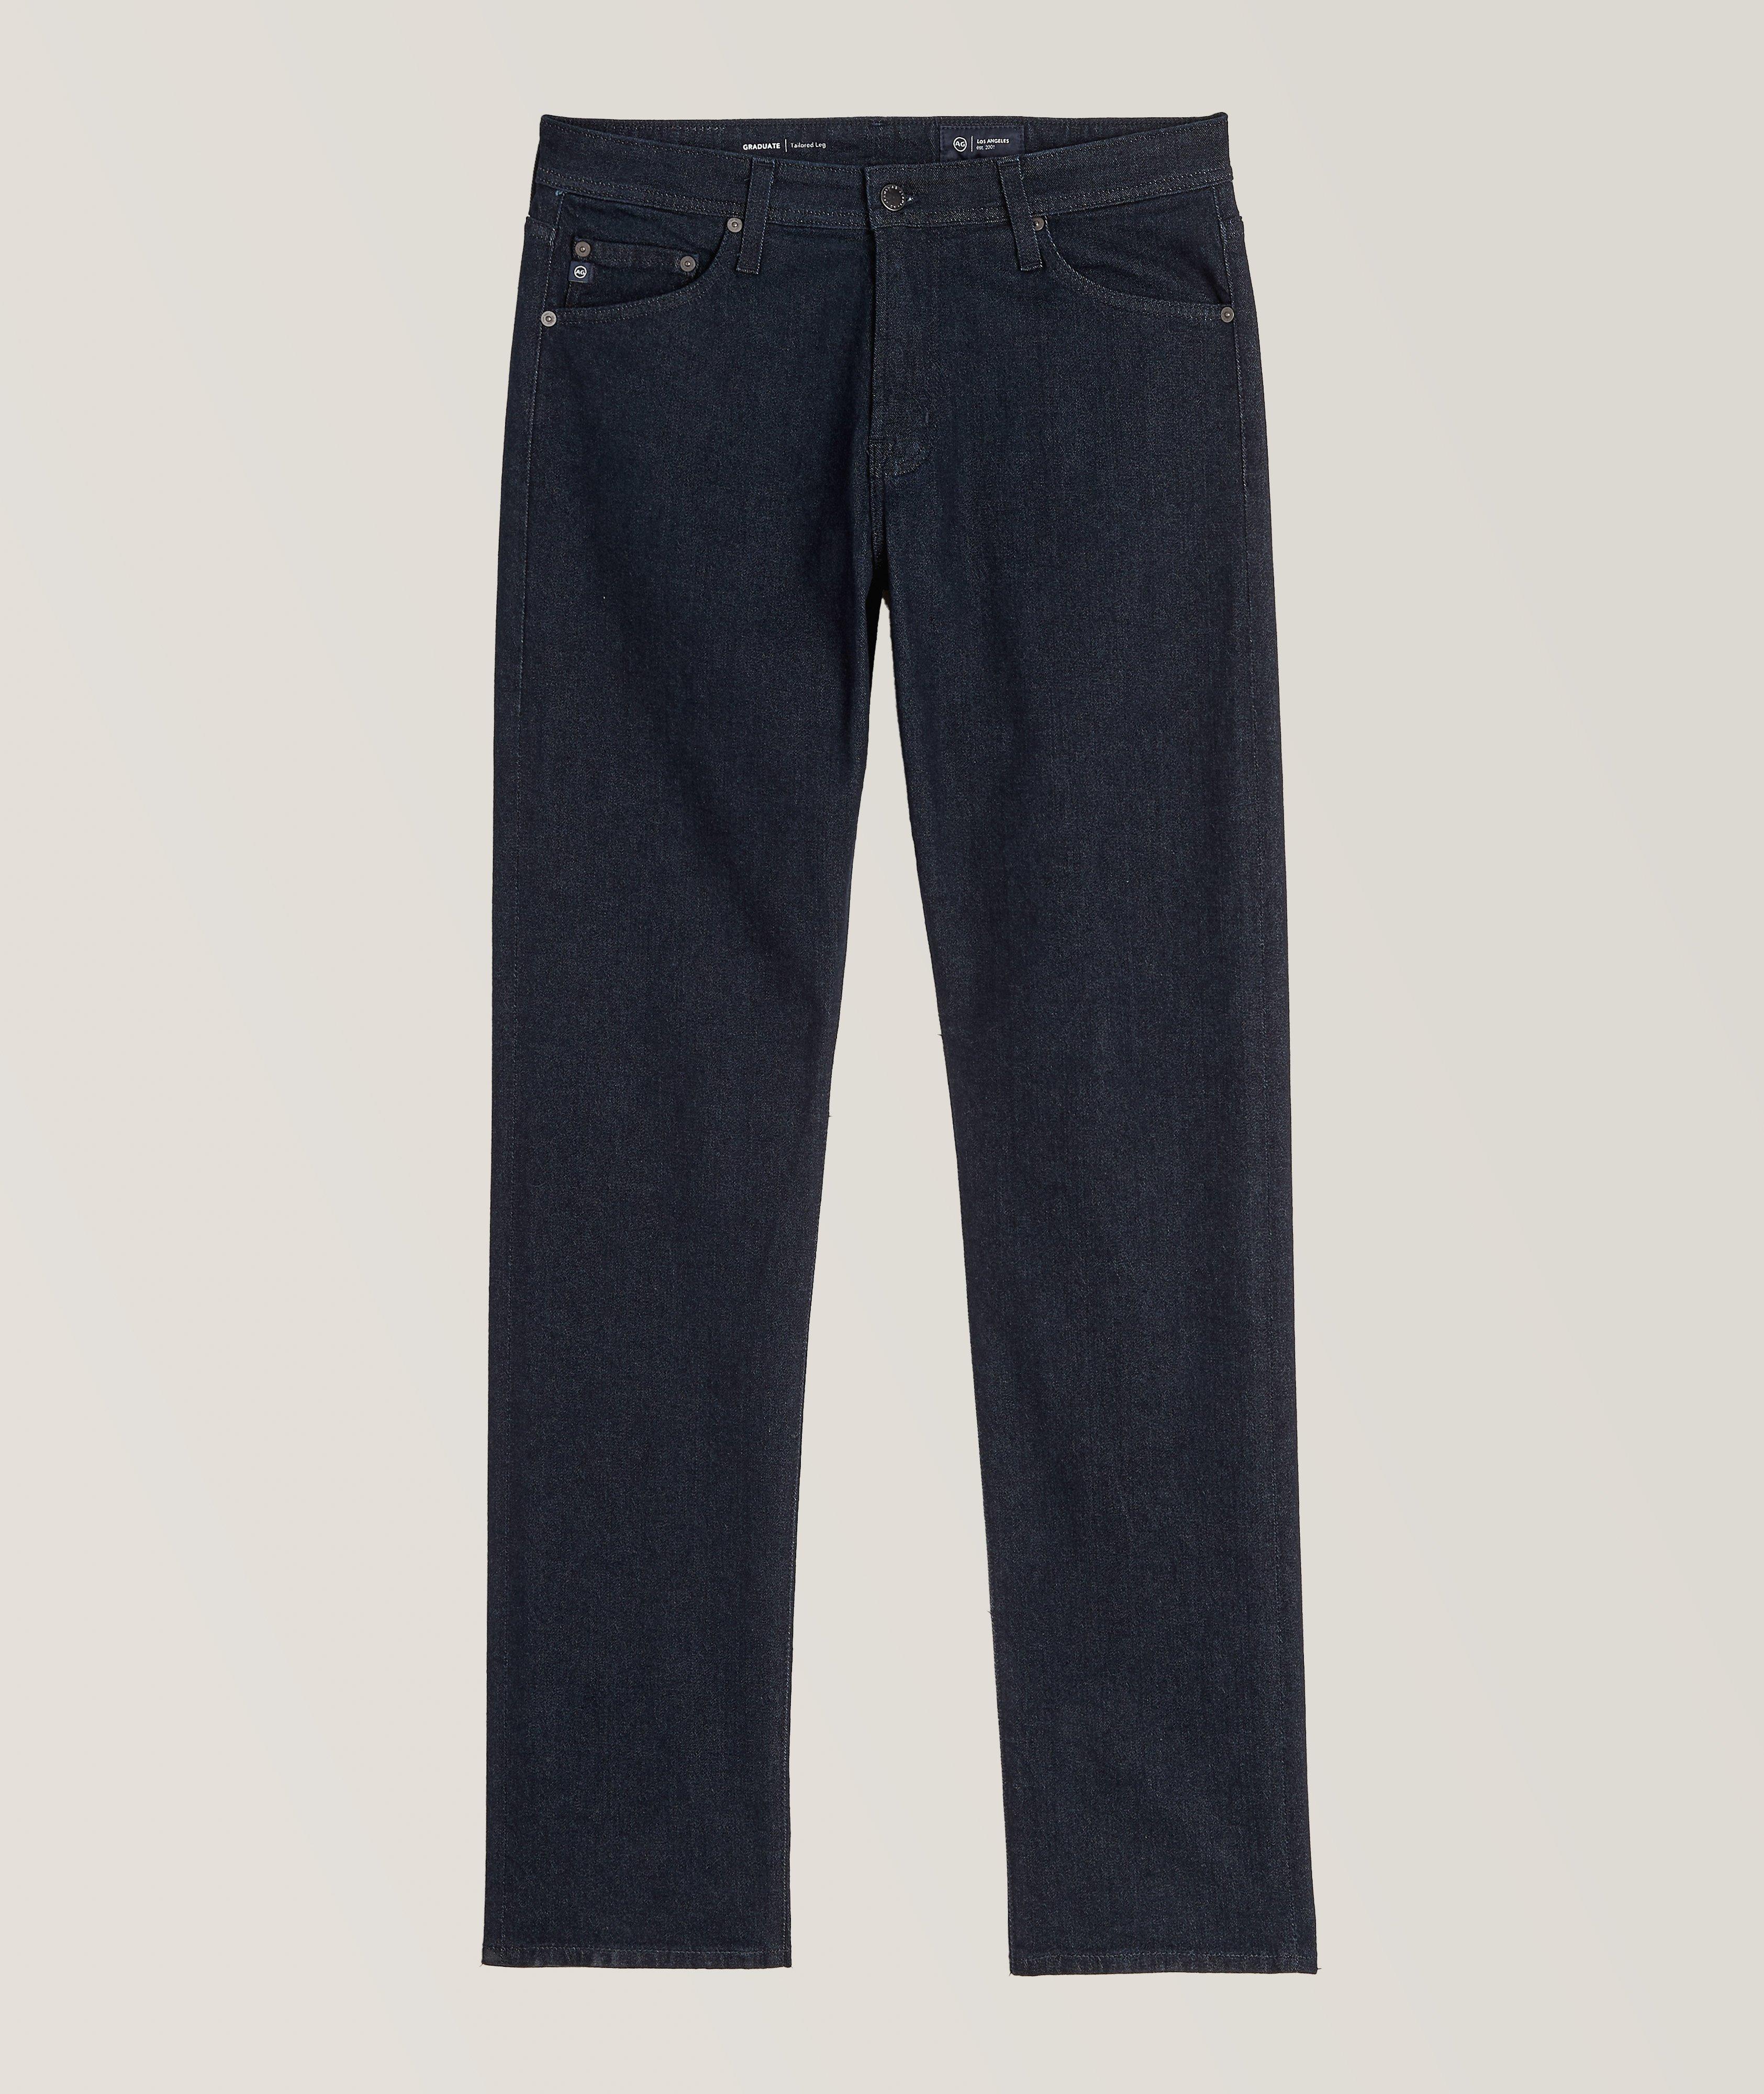 The Graduate Tailored Fit Stretch Jeans image 0